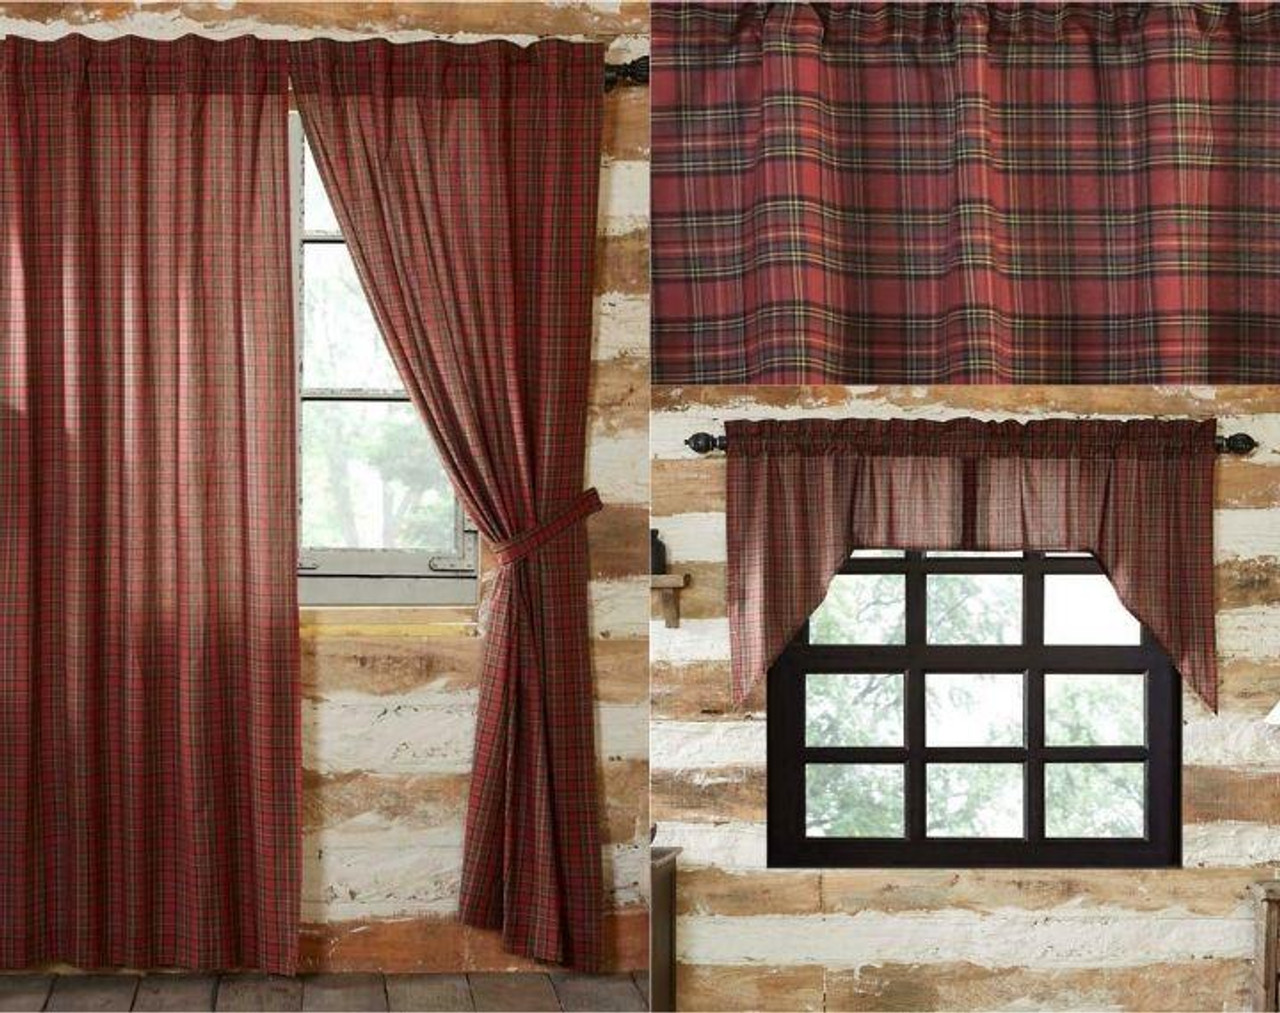 https://cdn11.bigcommerce.com/s-tfdhmk/images/stencil/1280x1280/products/16866/178536/Tartan-Red-Plaid-Curtain-Collection-colCurtainTartanRedPlaid_image1__74166.1689054777.jpg?c=2